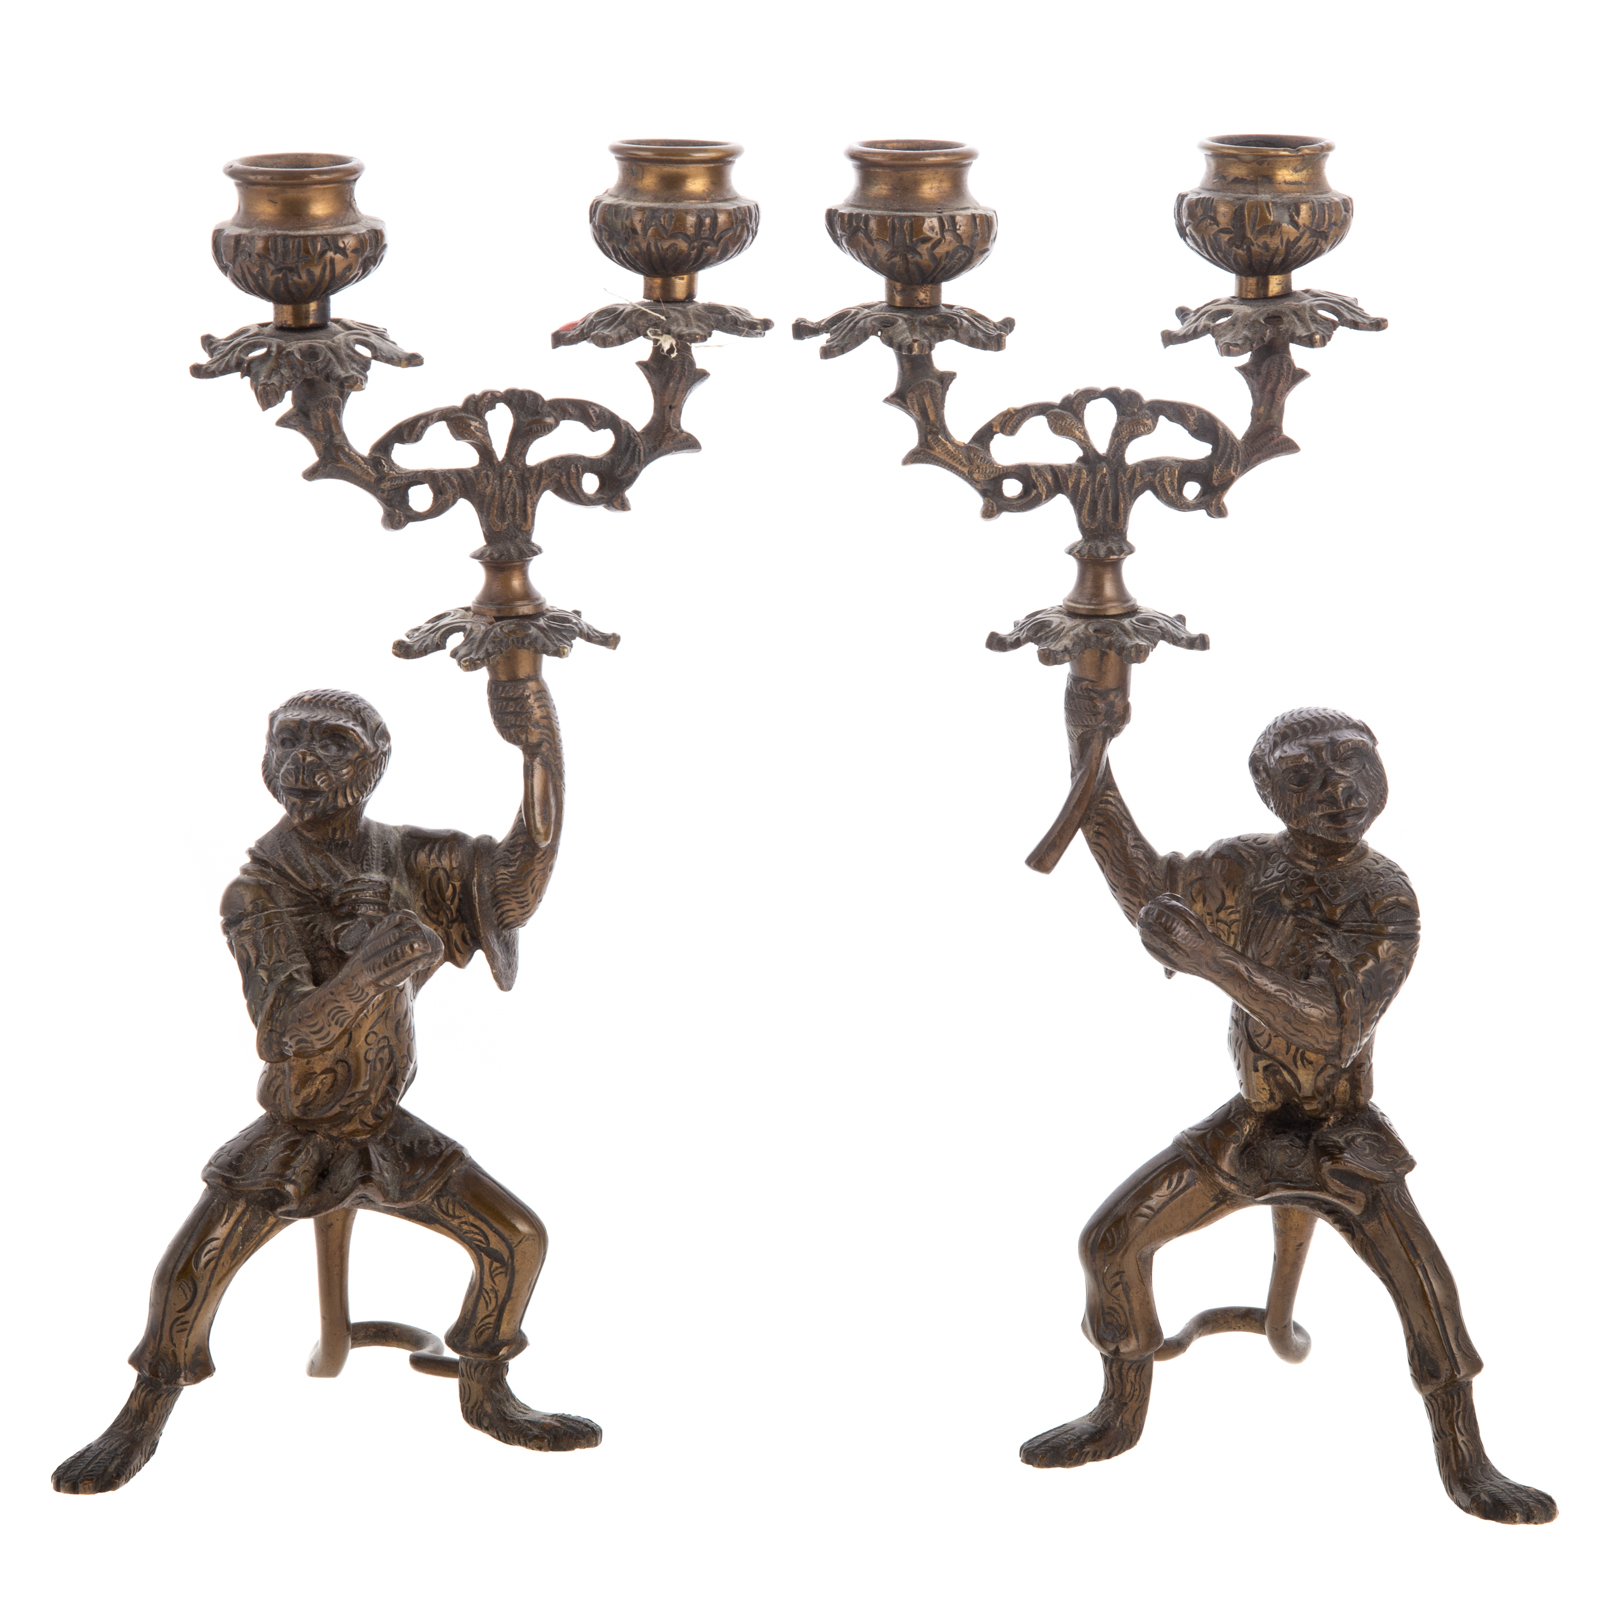 A PAIR OF CONTINENTAL BRONZE MONKEY